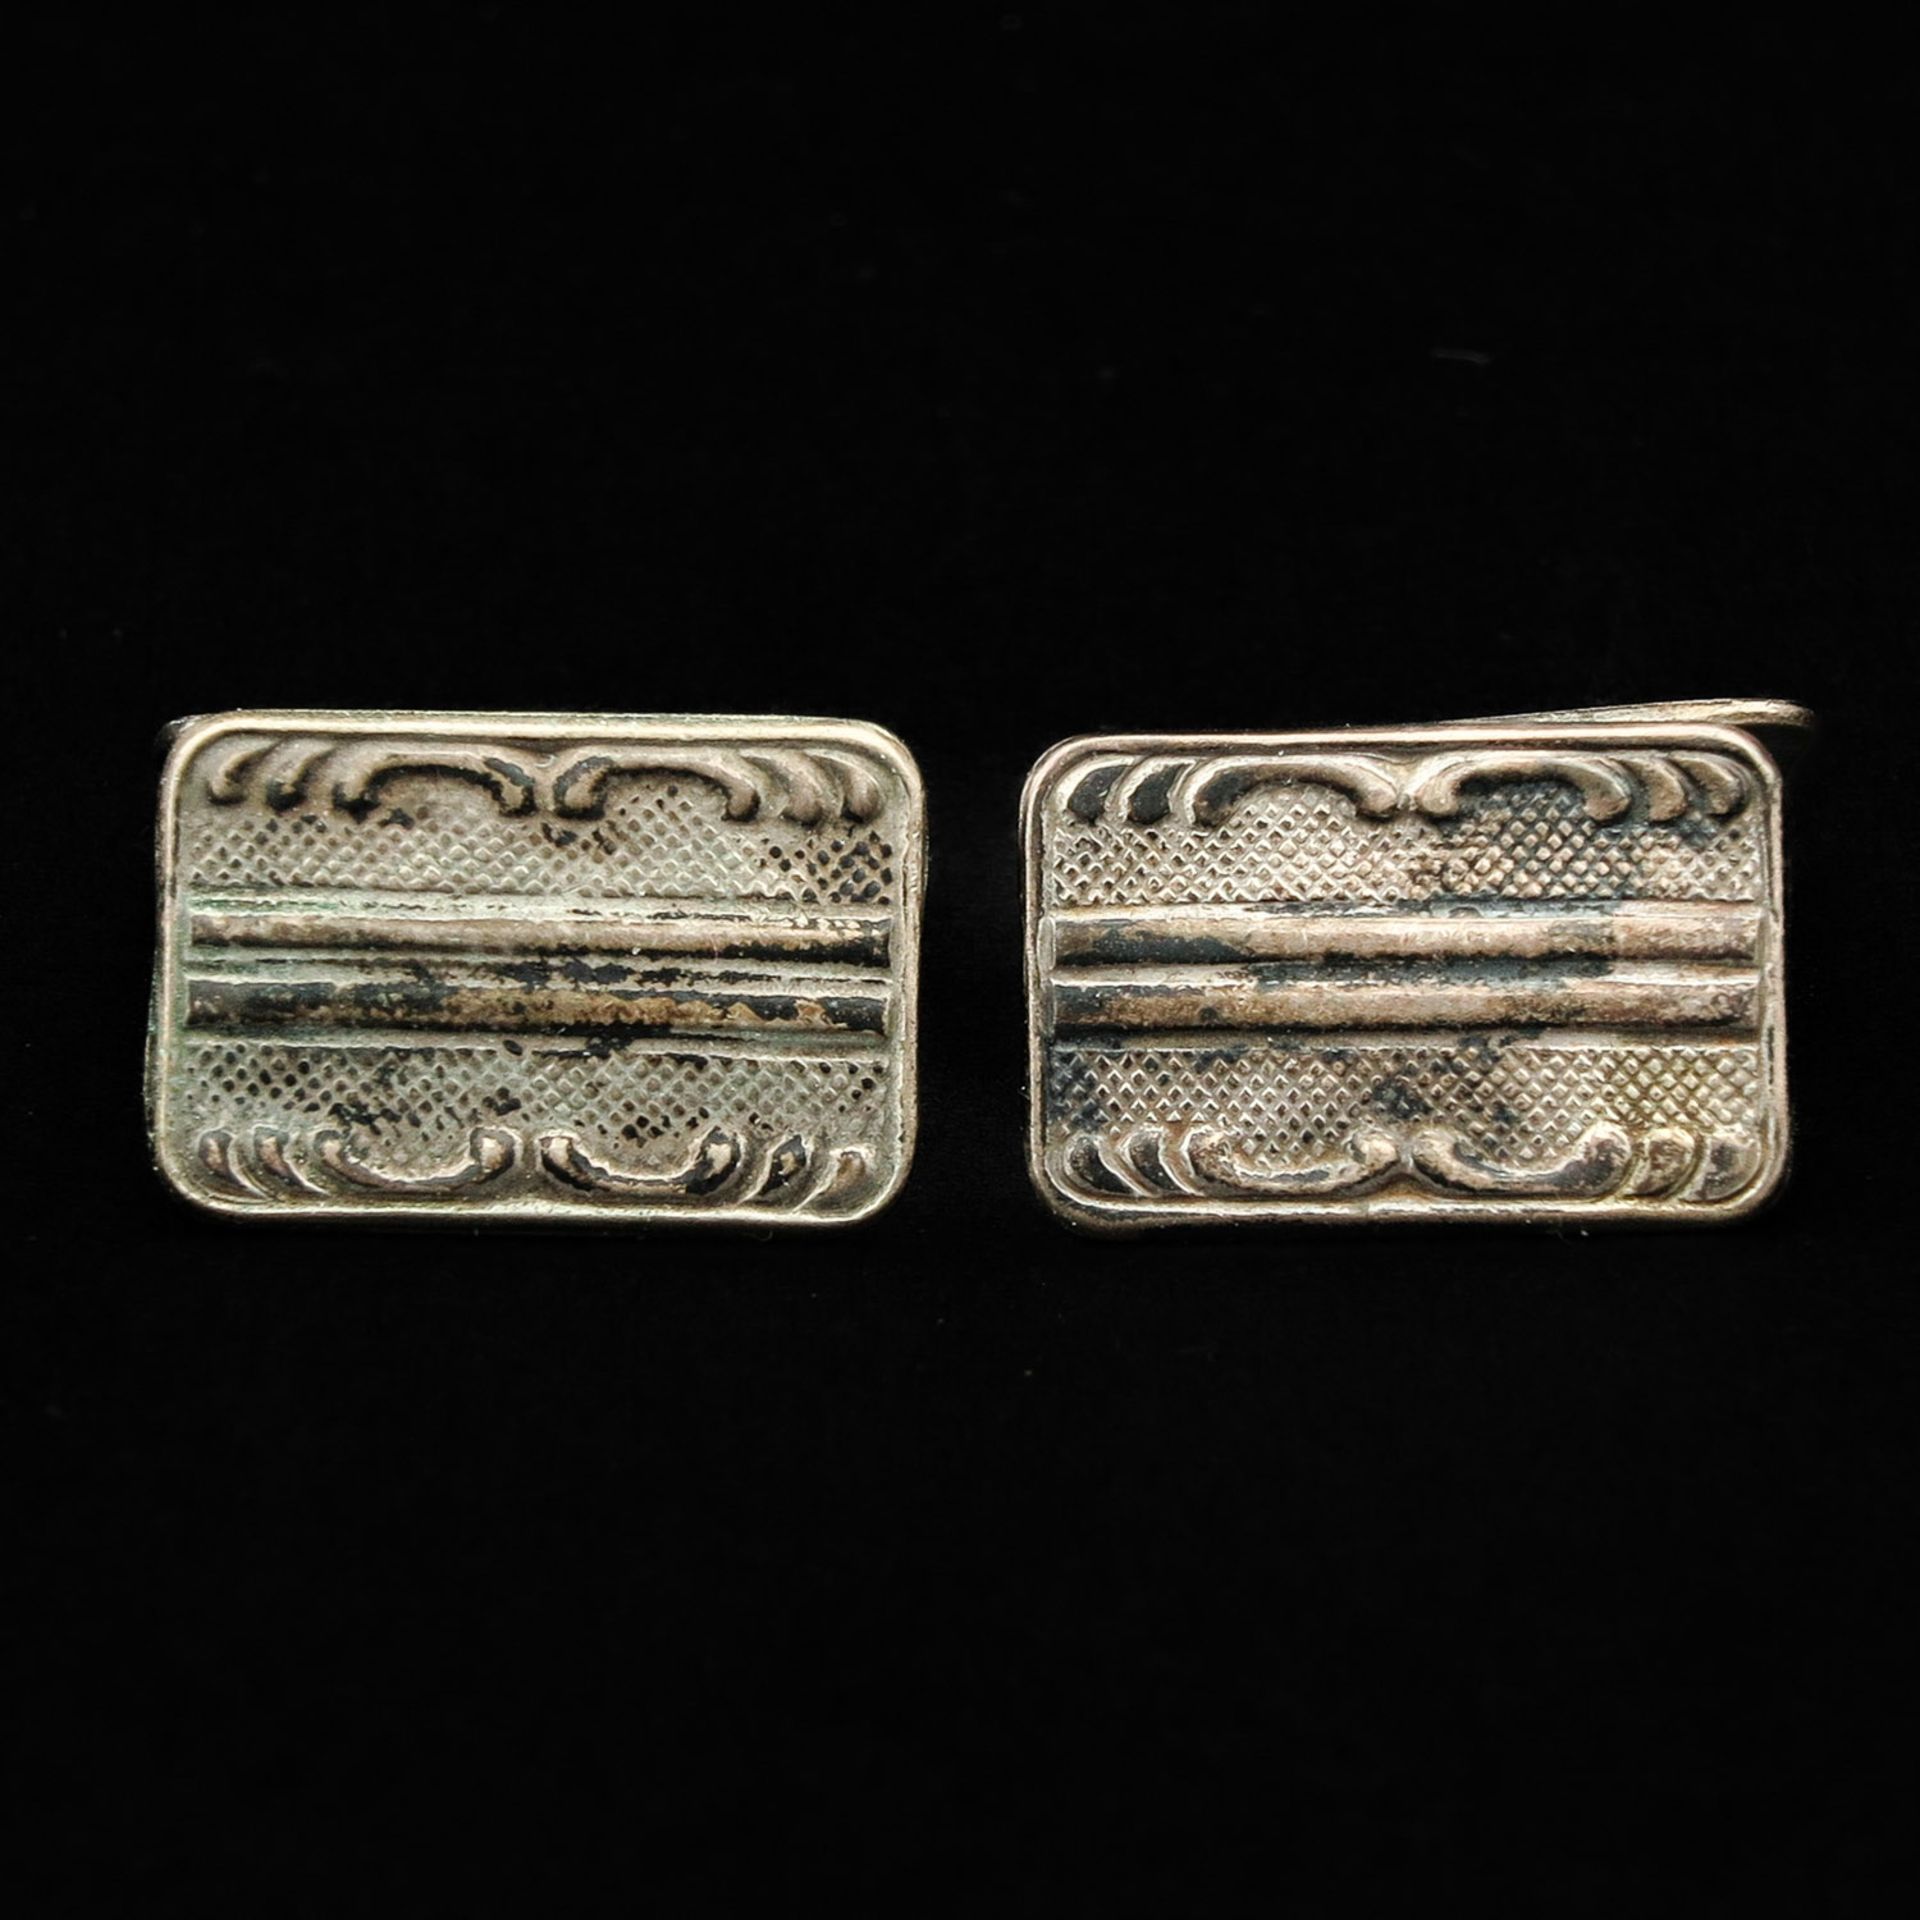 A Collection of Cuff Links - Image 8 of 9